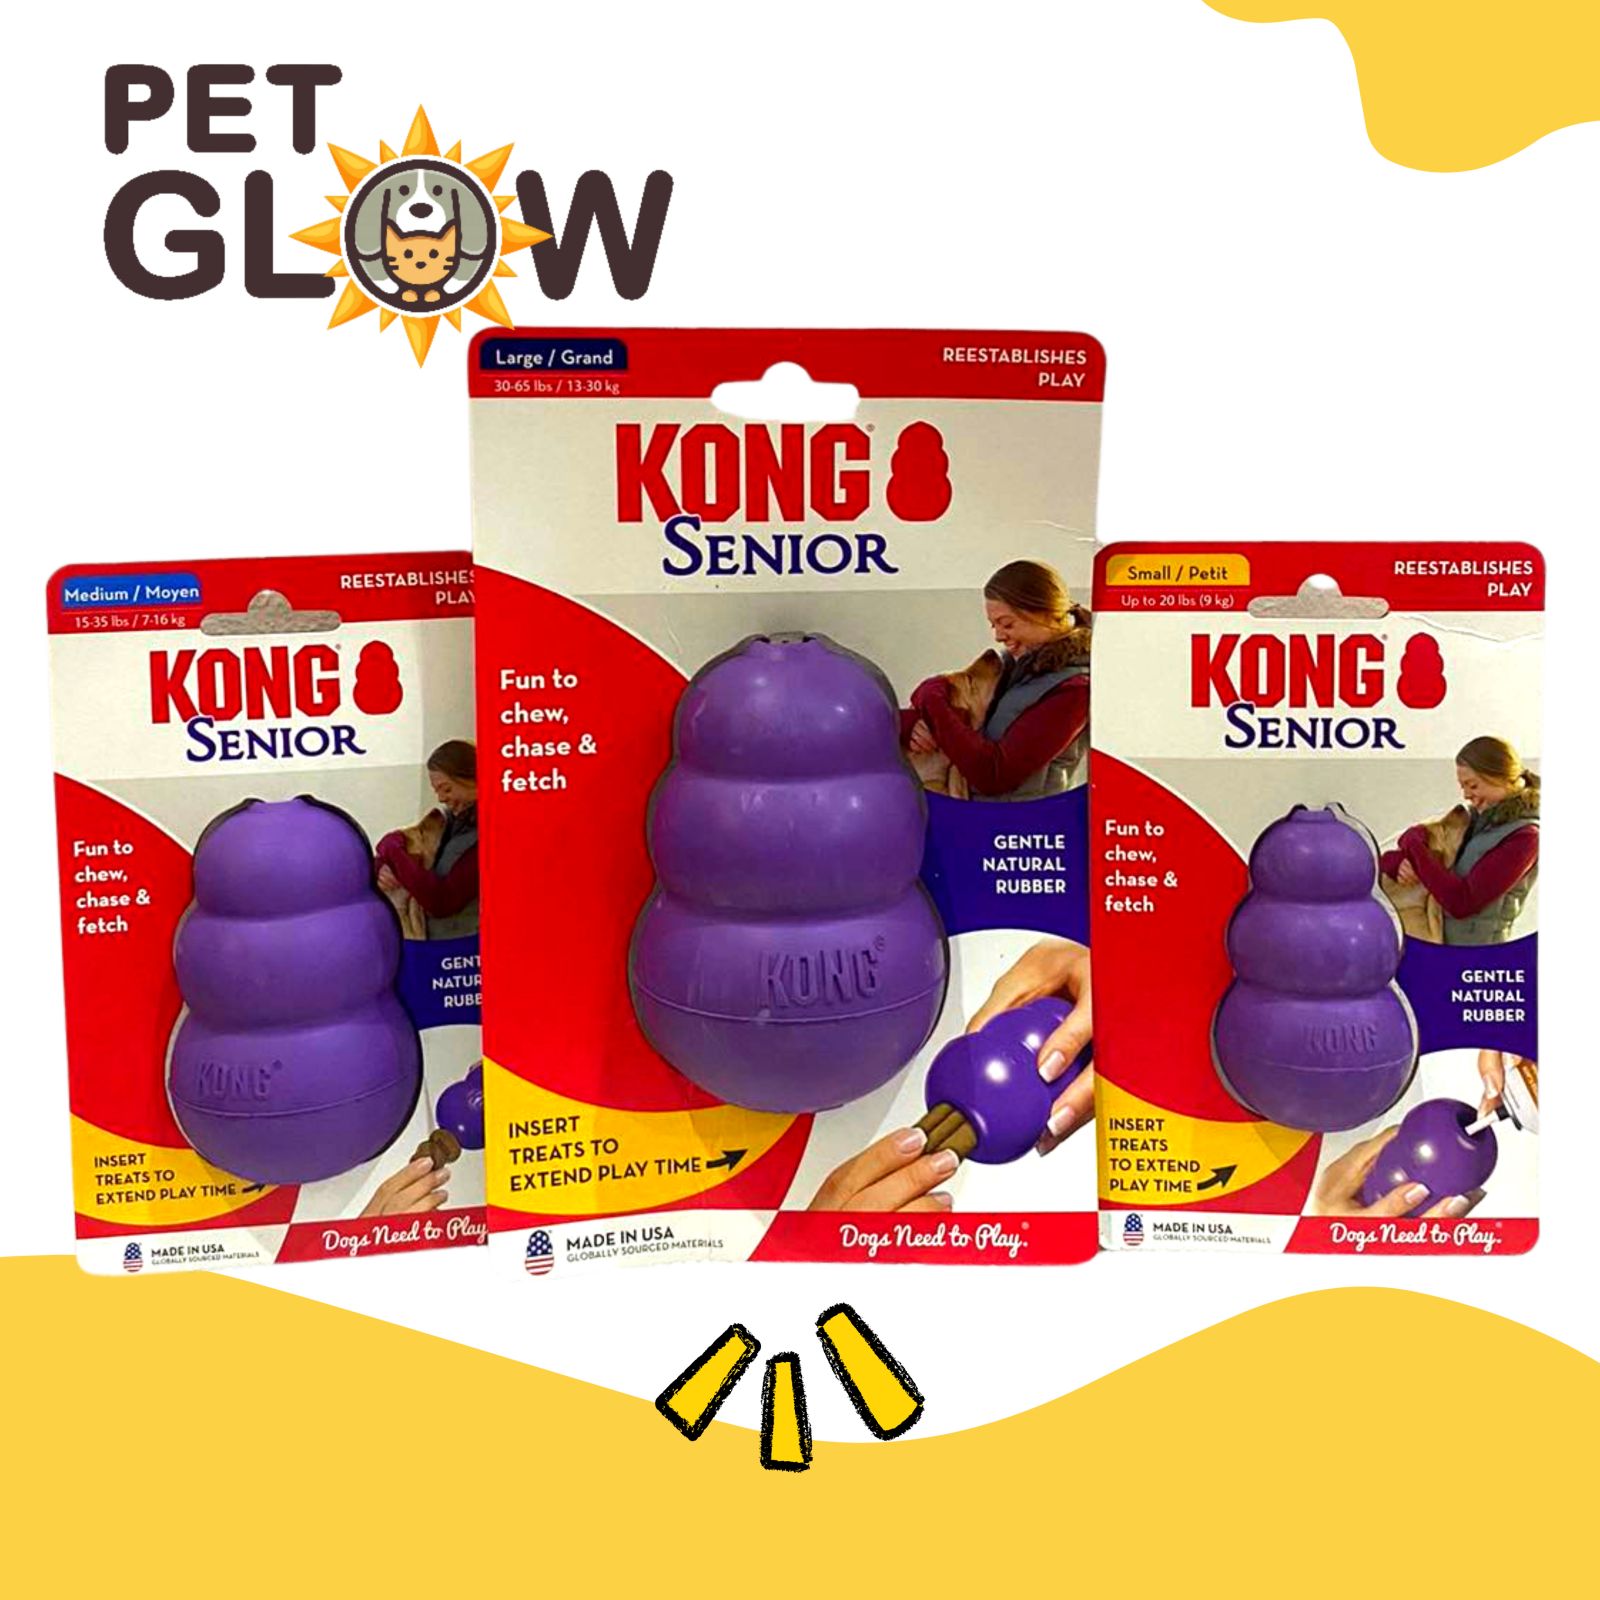 KONG - Senior Dog Toy Gentle Natural Rubber - Fun to Chew, Chase and Fetch  - for Medium Dogs